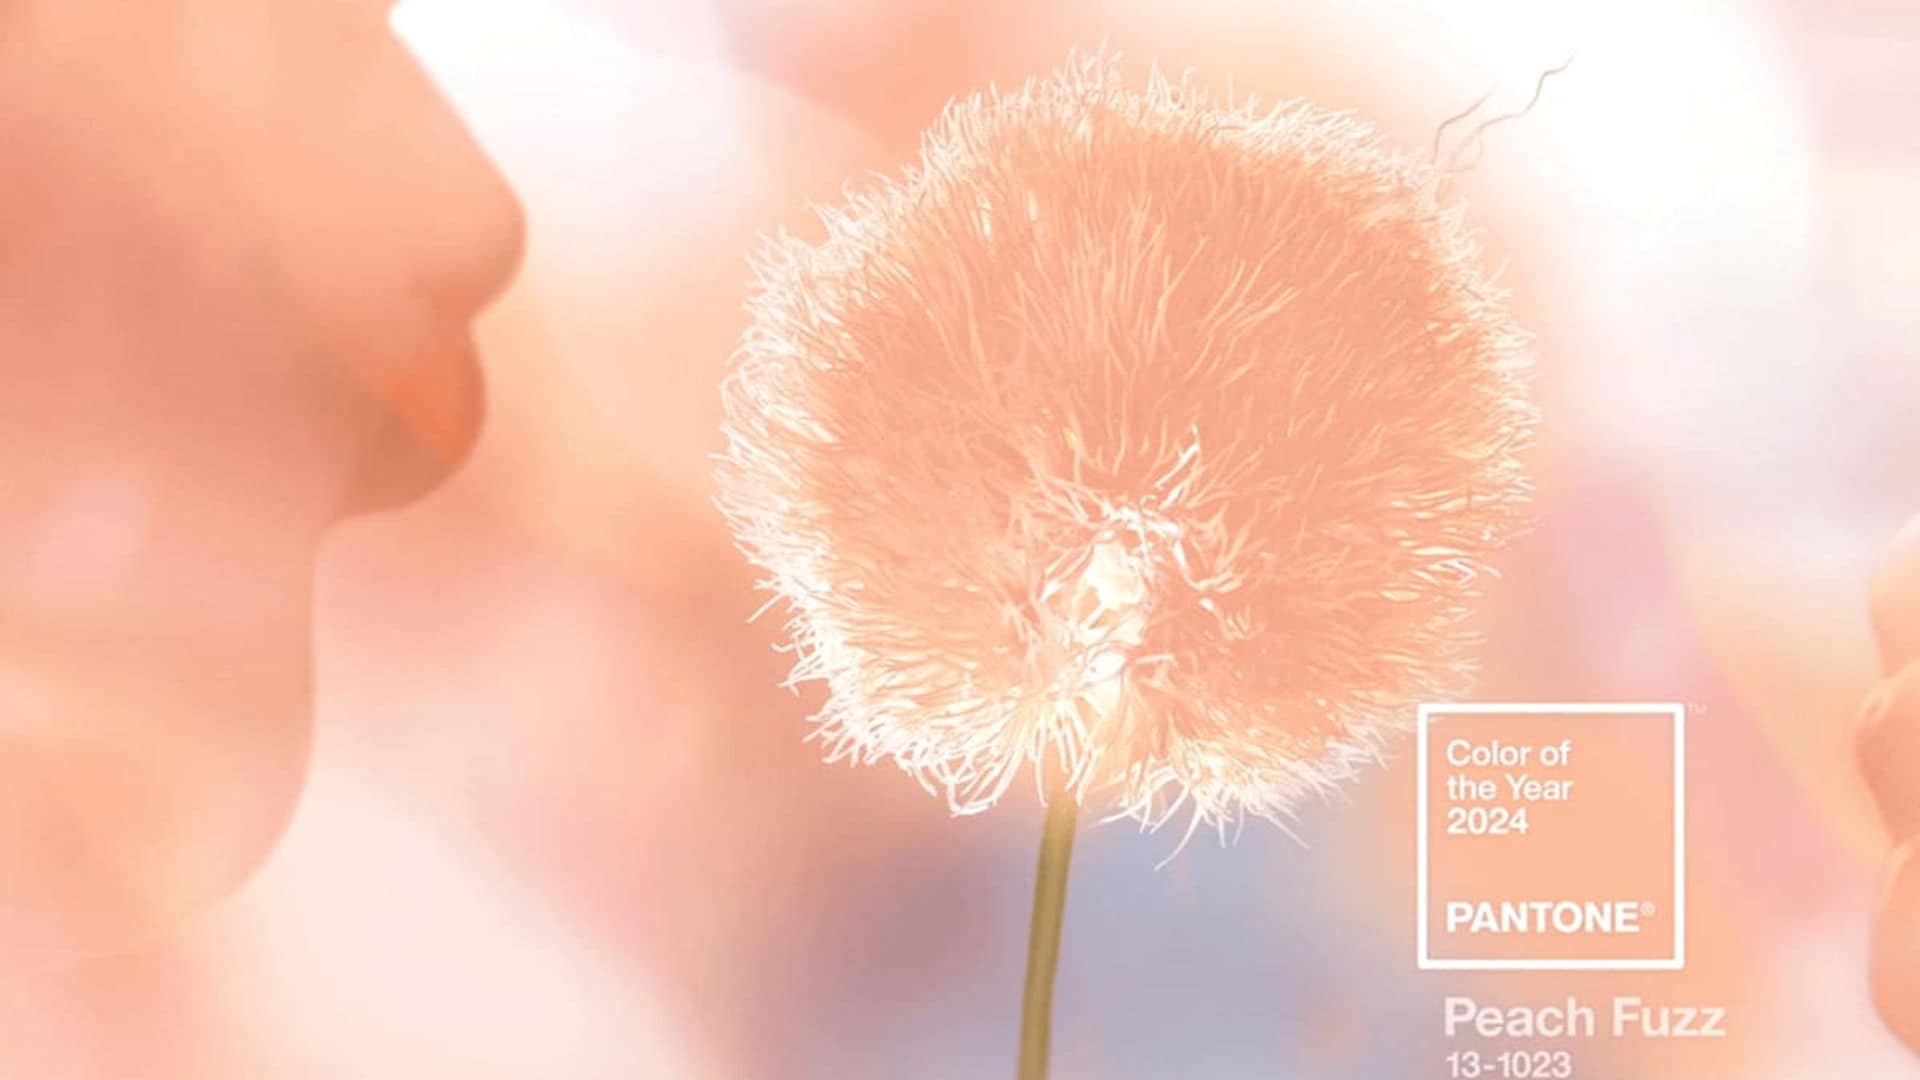 Pantone names Peach Fuzz as the color of 2024: What does this tone mean?